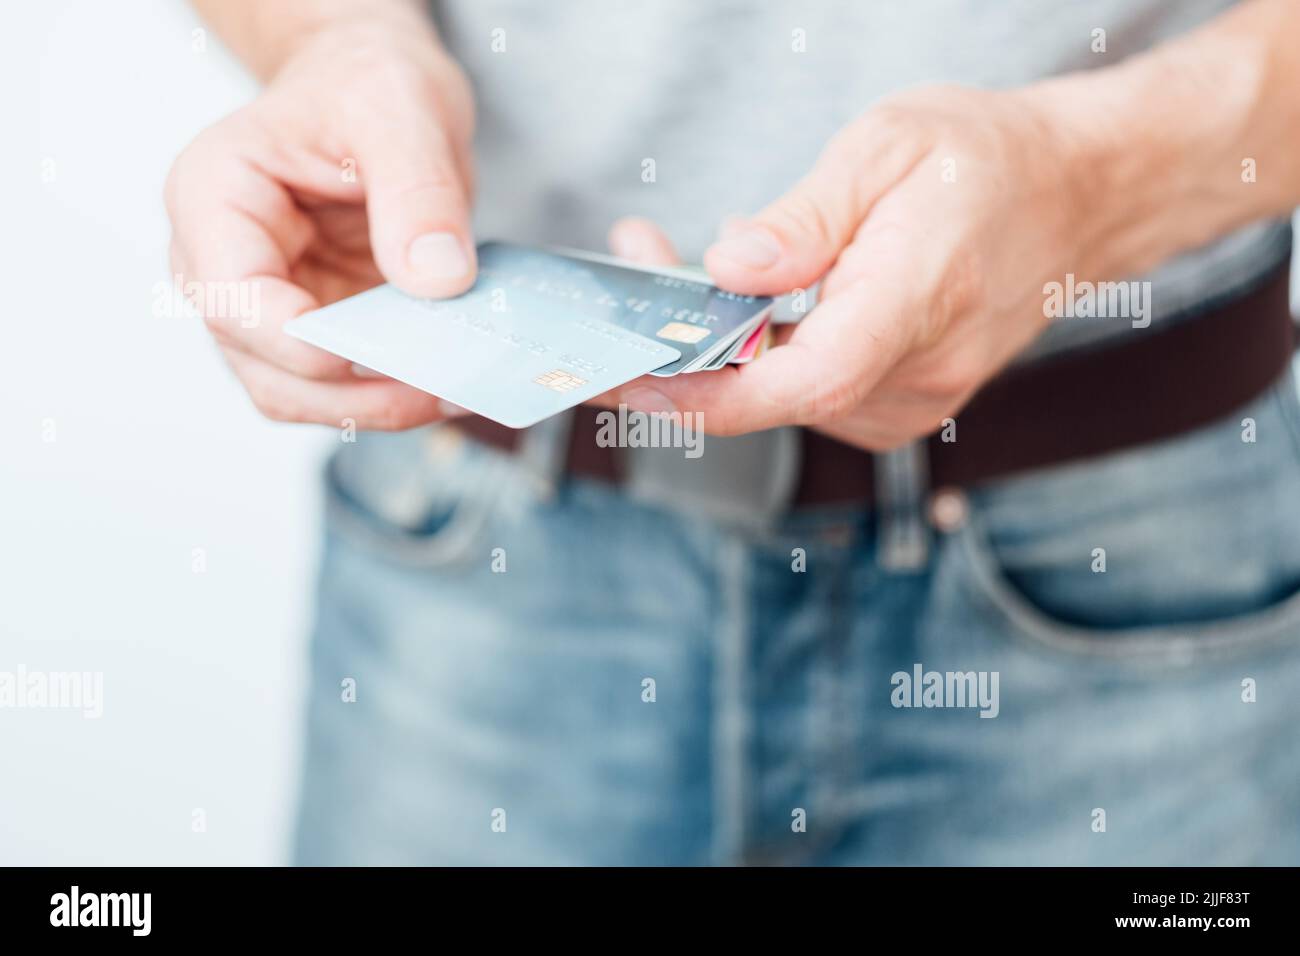 credit card key banking account personal finance Stock Photo